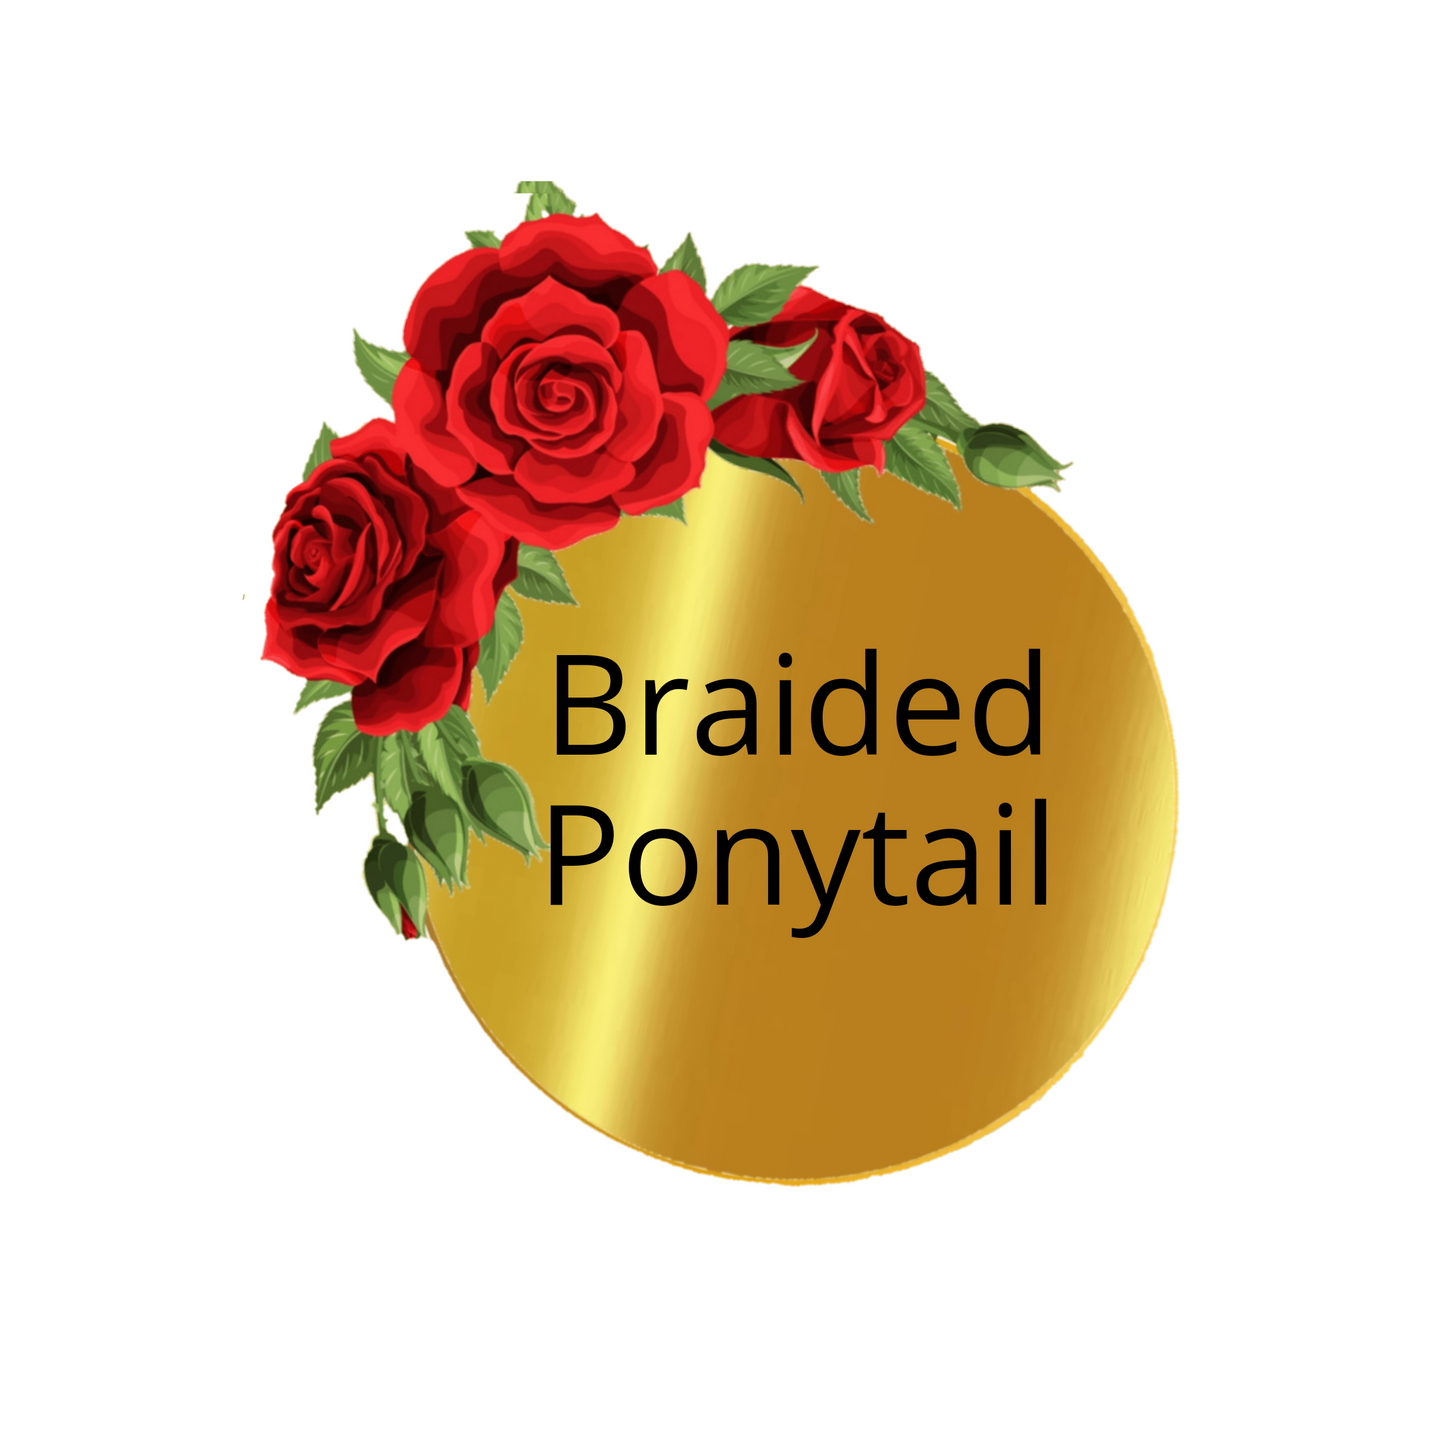 Braided Ponytail (Relaxed Hair)